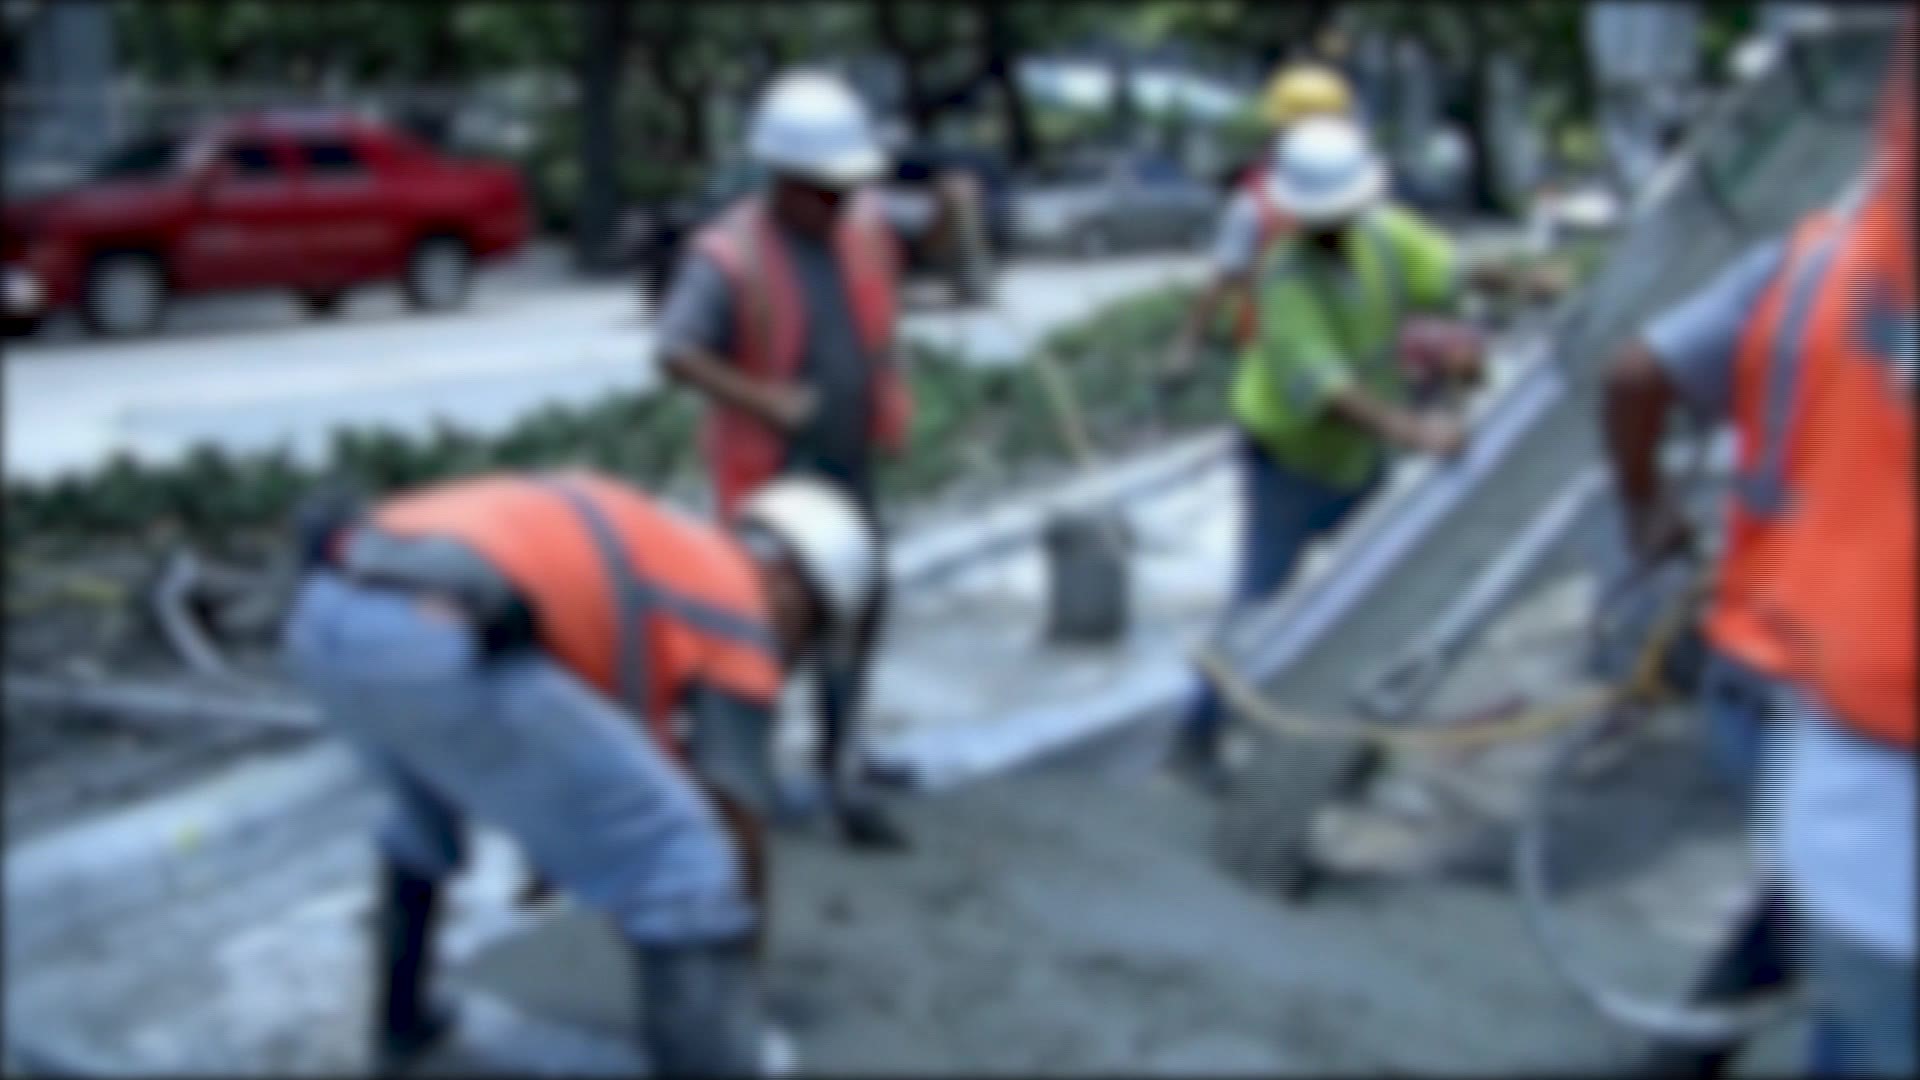 Construction workers more likely to abuse cocaine, opioids than other professions